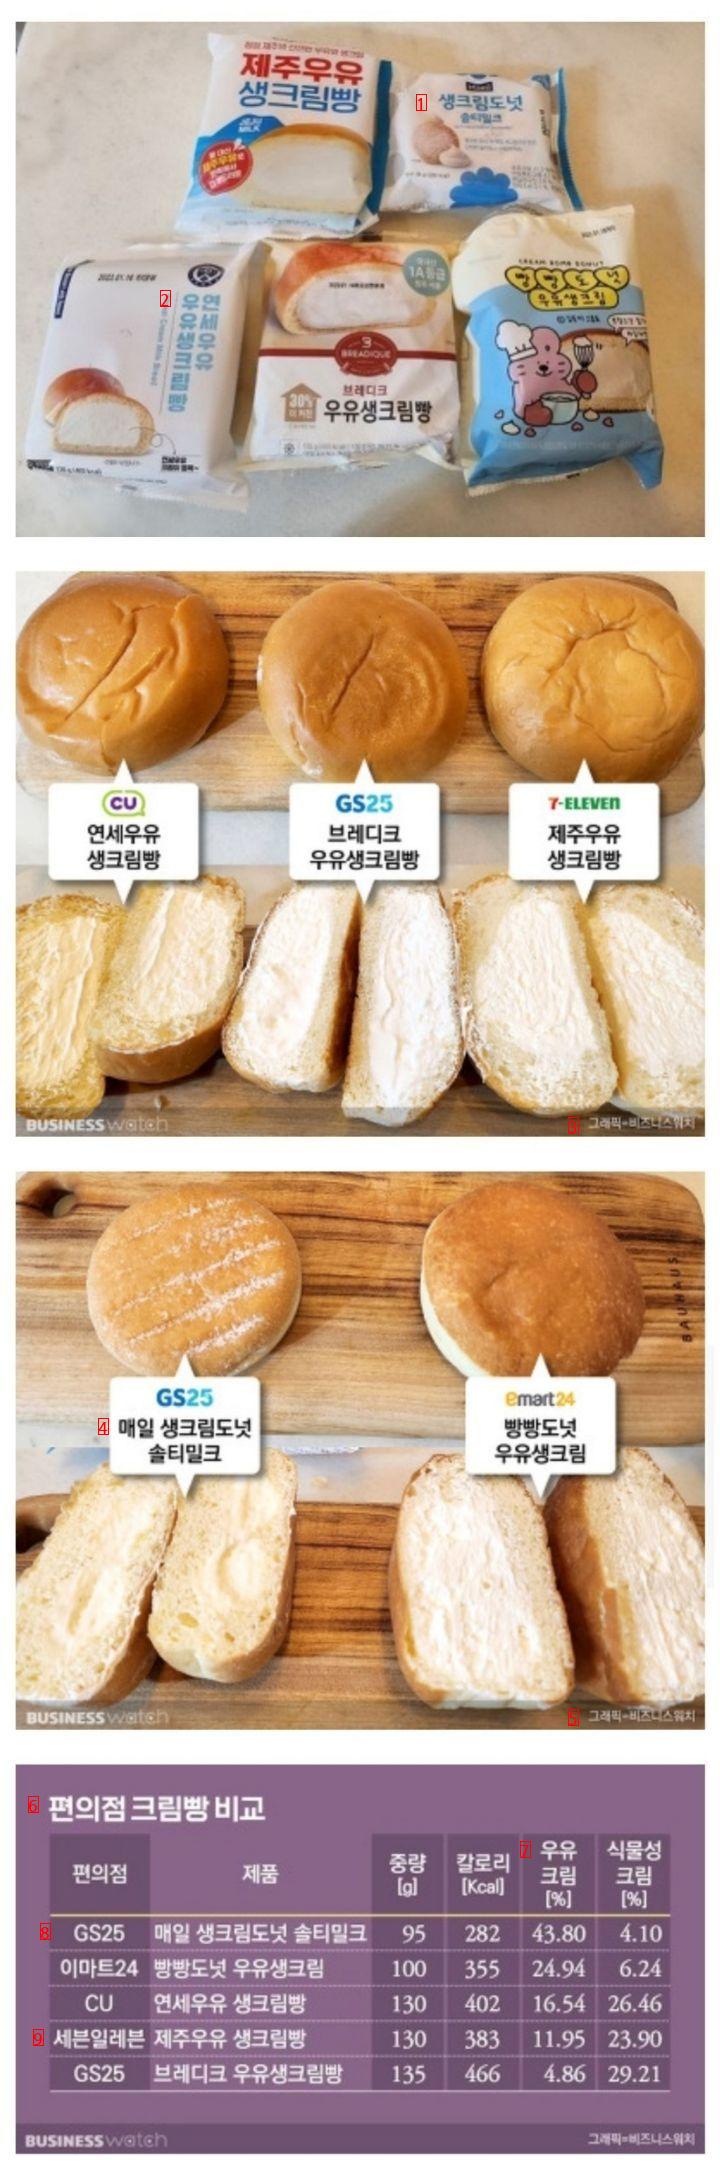 Convenience stores are competing for cream bread.